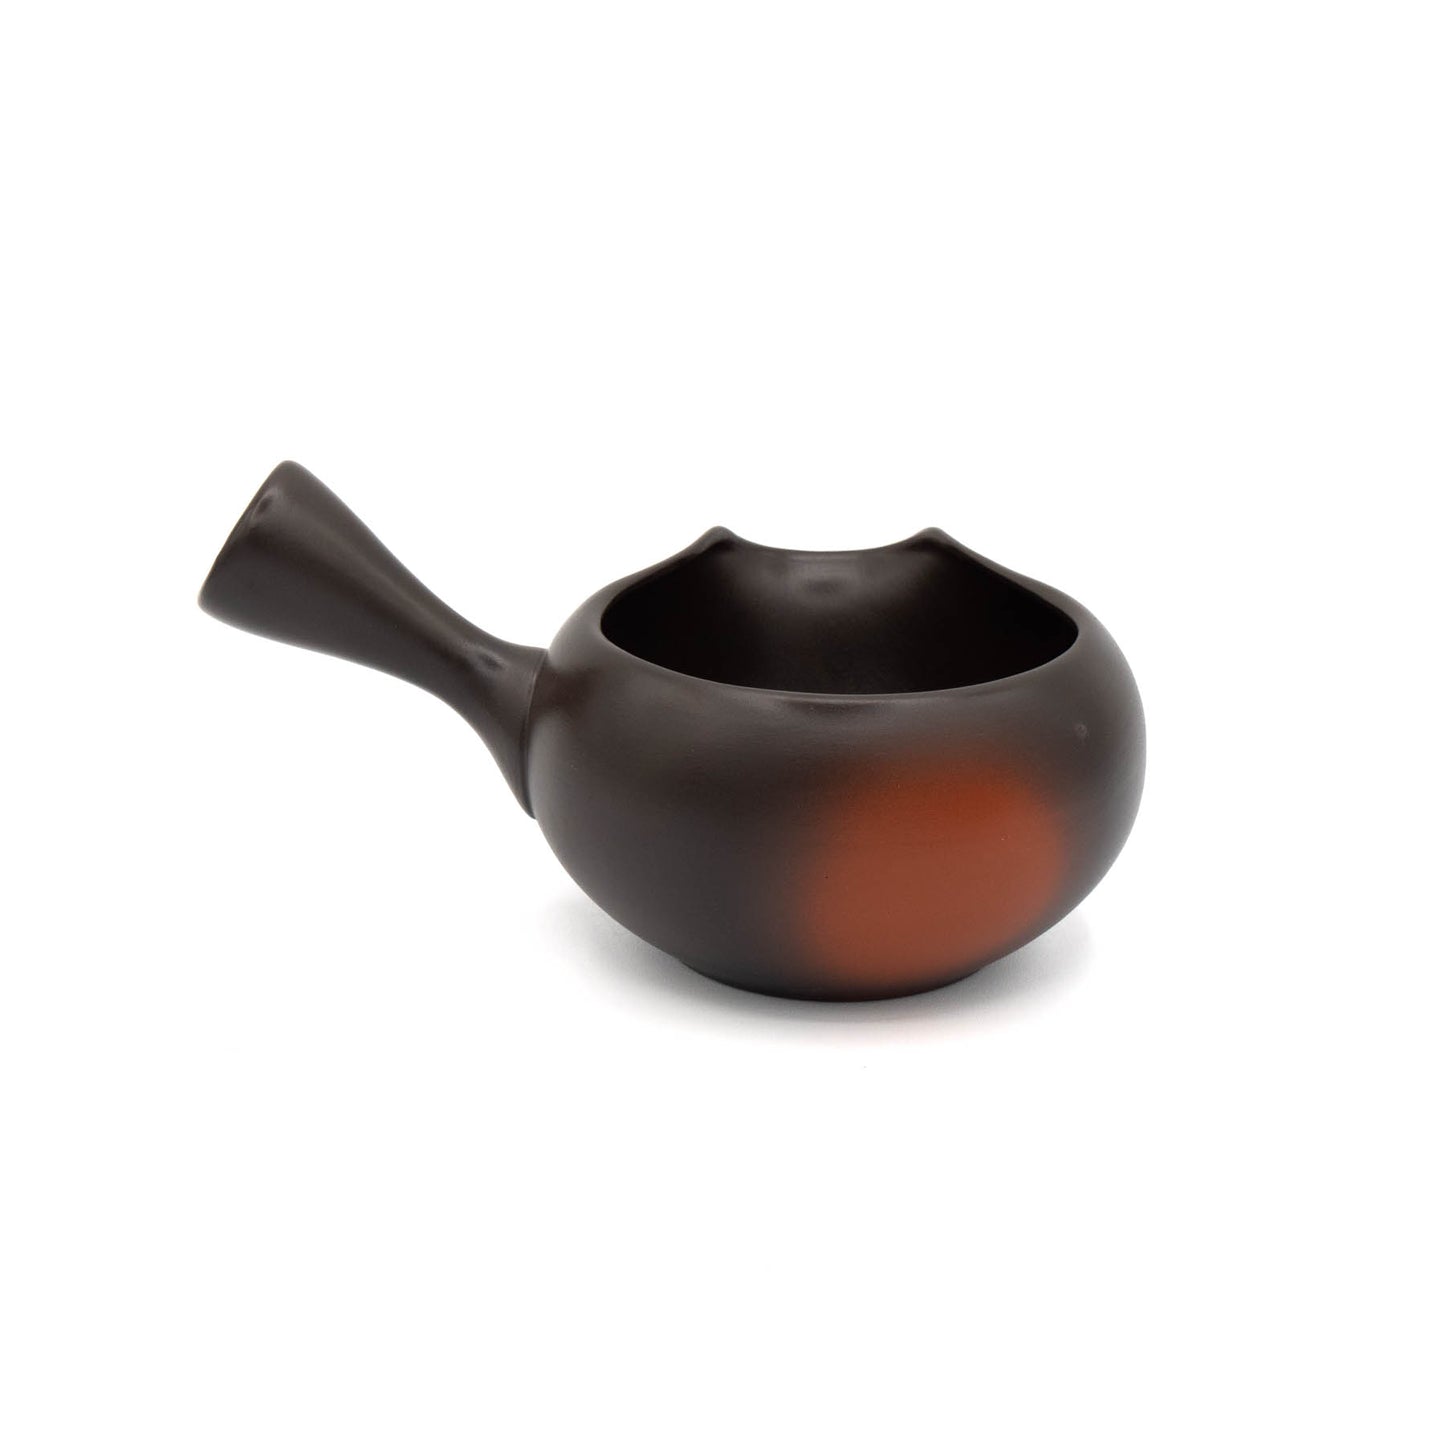 Tokoname Ware - Hot water strainer for delicious tea